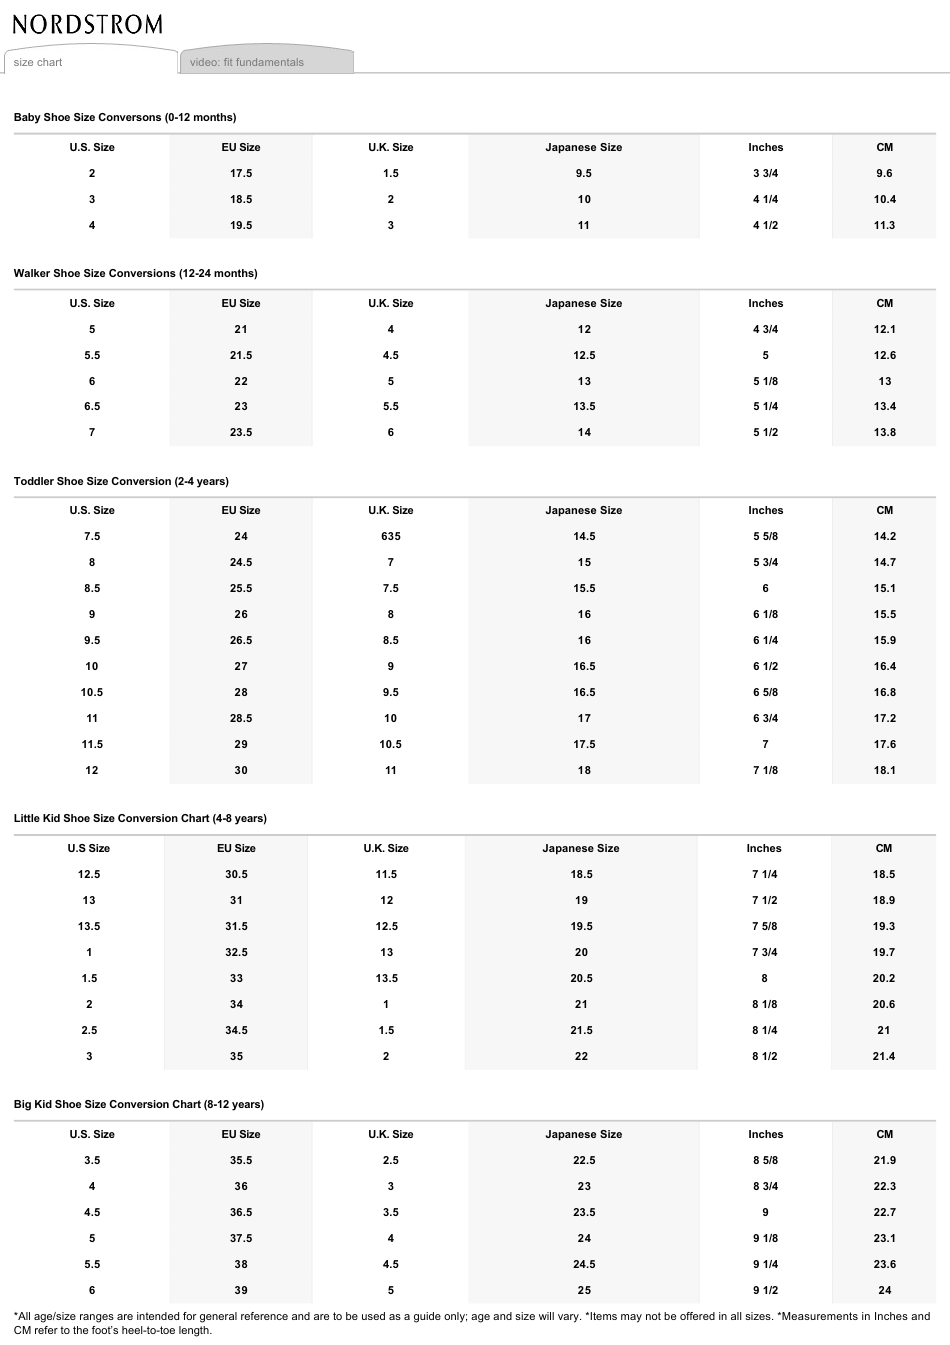 Childrens Shoe Size Conversion Charts - Nordstrom, Page 1